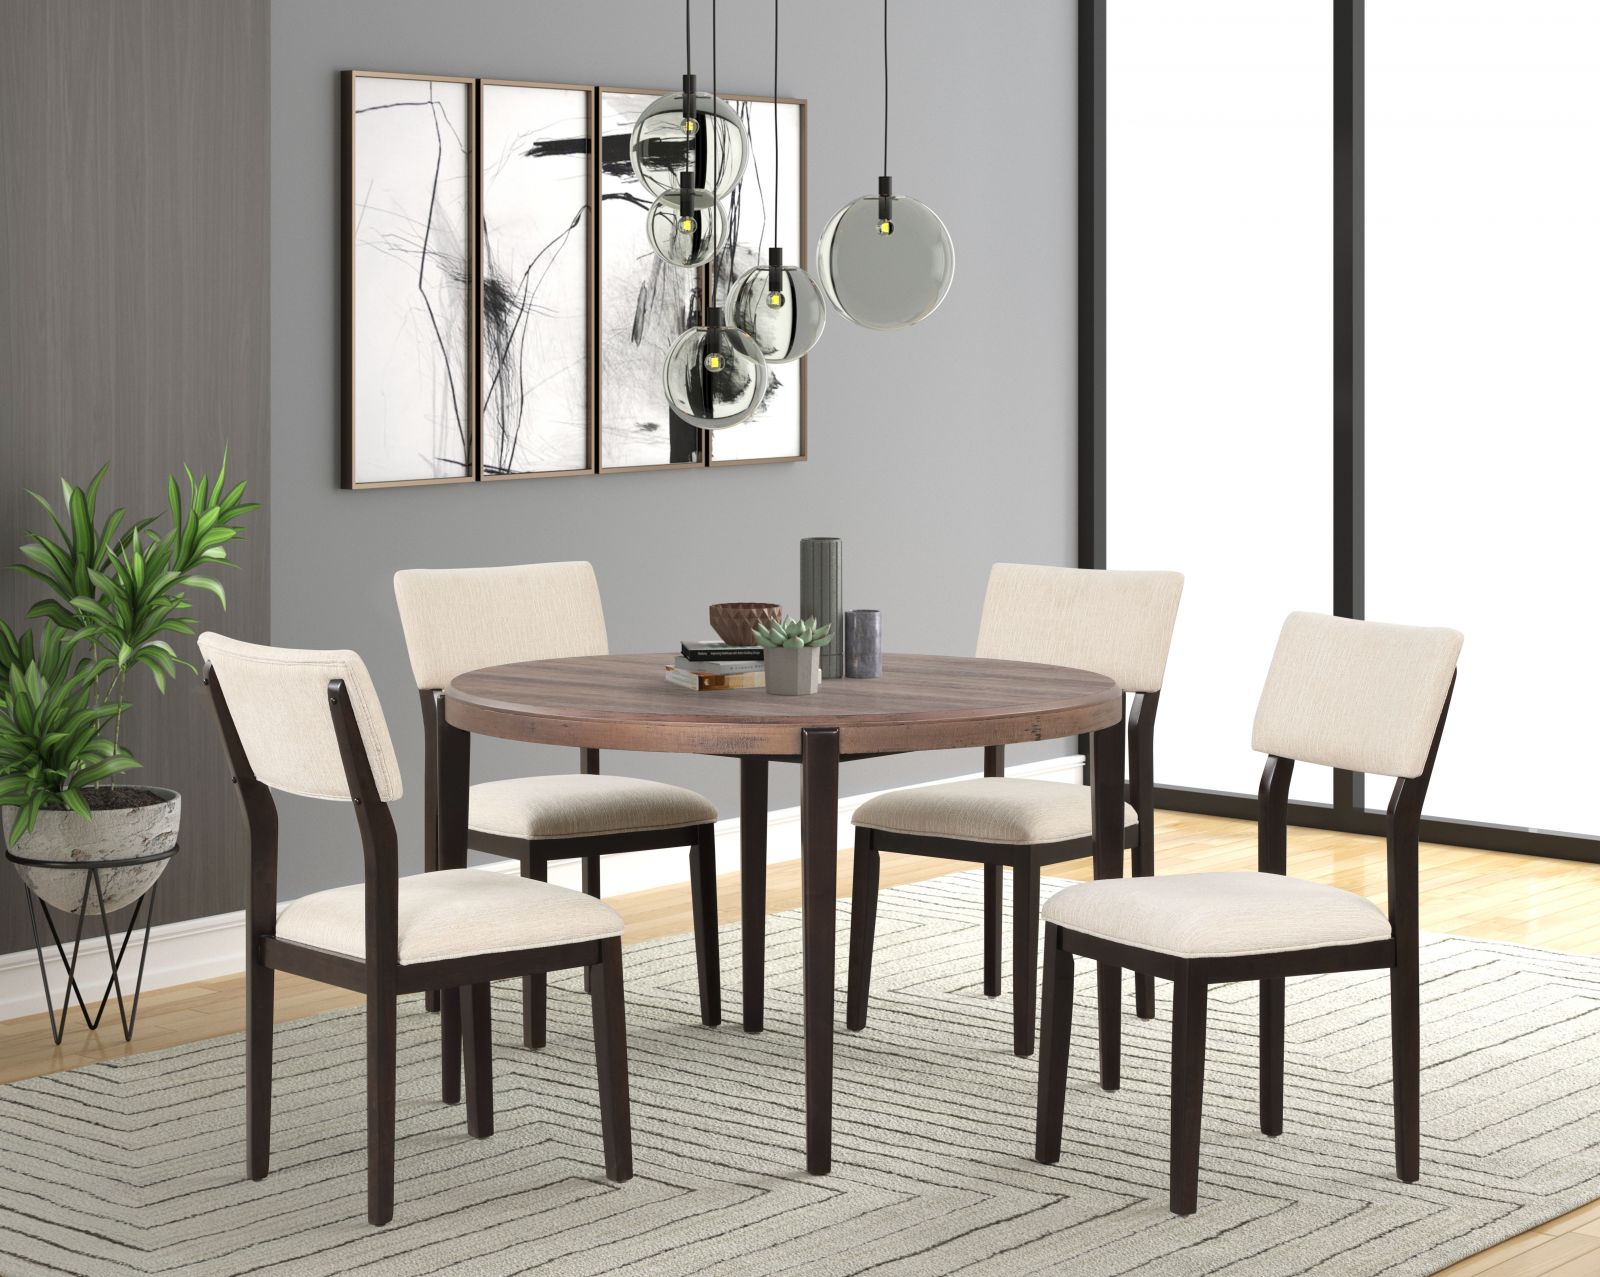 Kolby Round Dining Table